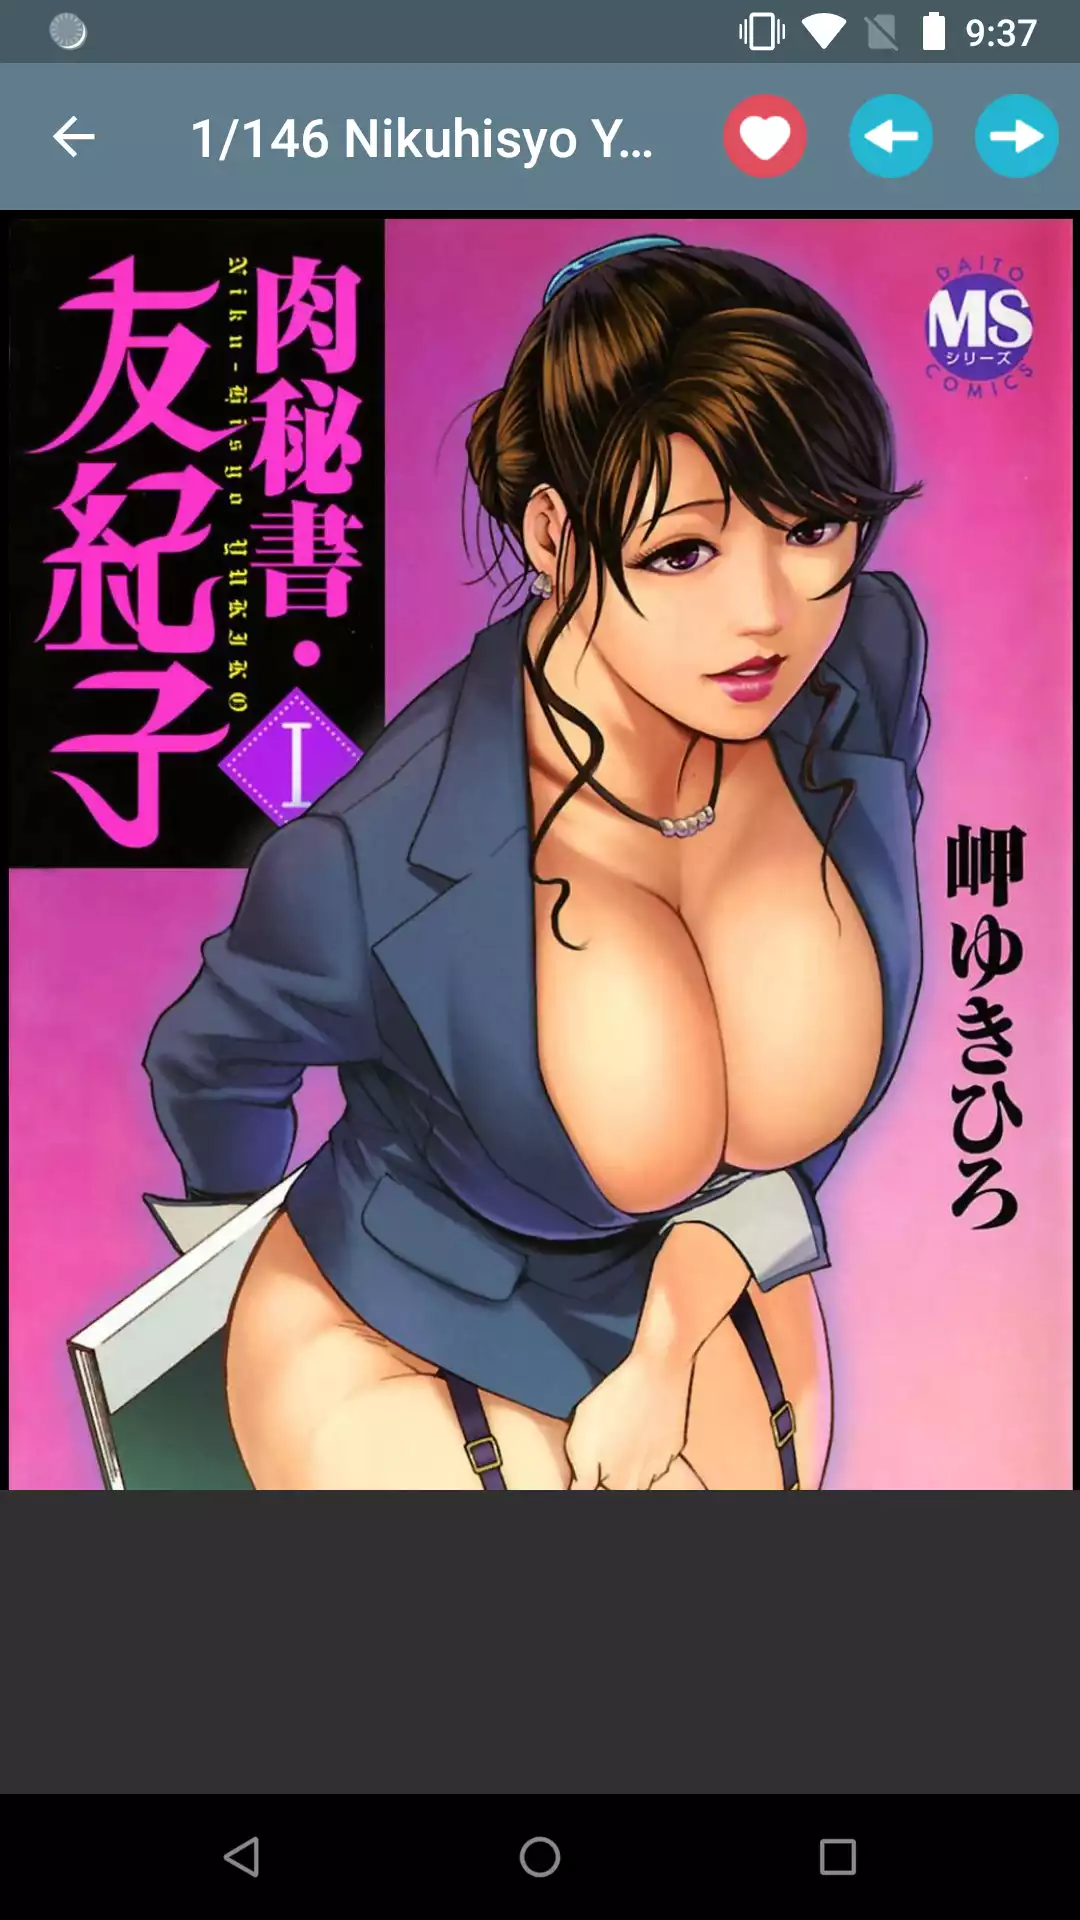 Nikuhisyo Yukiko pic,tits,hentai,sexy,big,ebony,for,app,free,japan,viewer,hentia,android,henti,picture,comics,pegging,shemales,wallpaper,pics,porn,apps,femdom,gallery,image